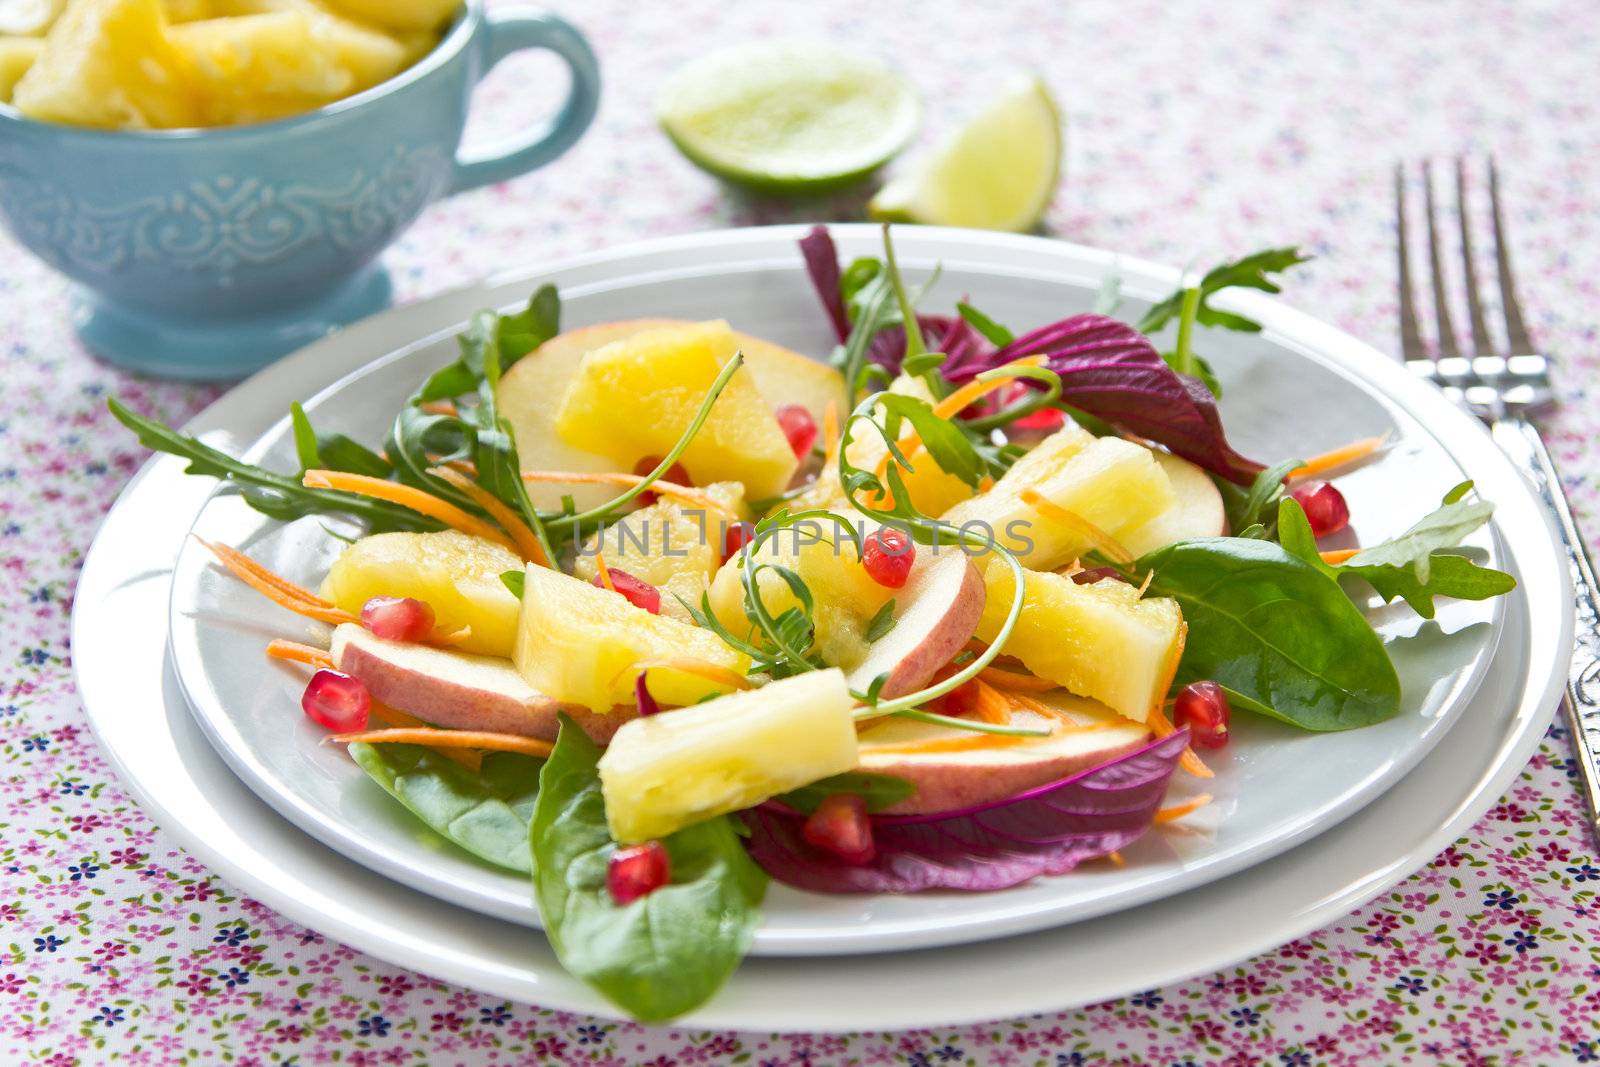 Pineapple with pomegranate and spinach salad